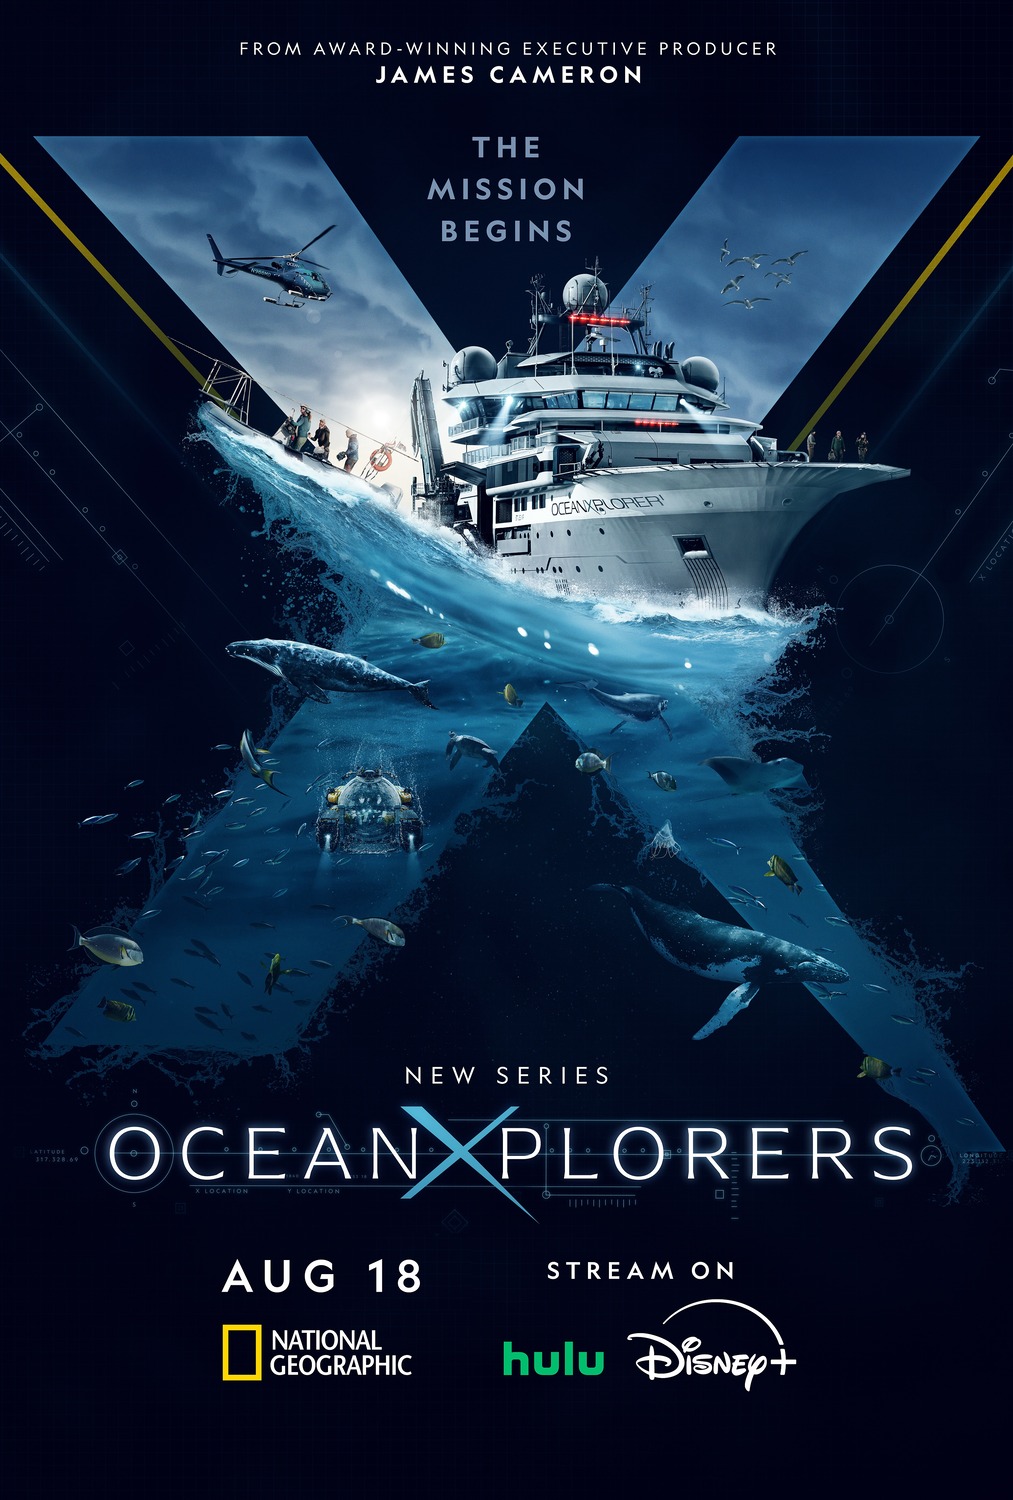 Extra Large TV Poster Image for OceanXplorers 